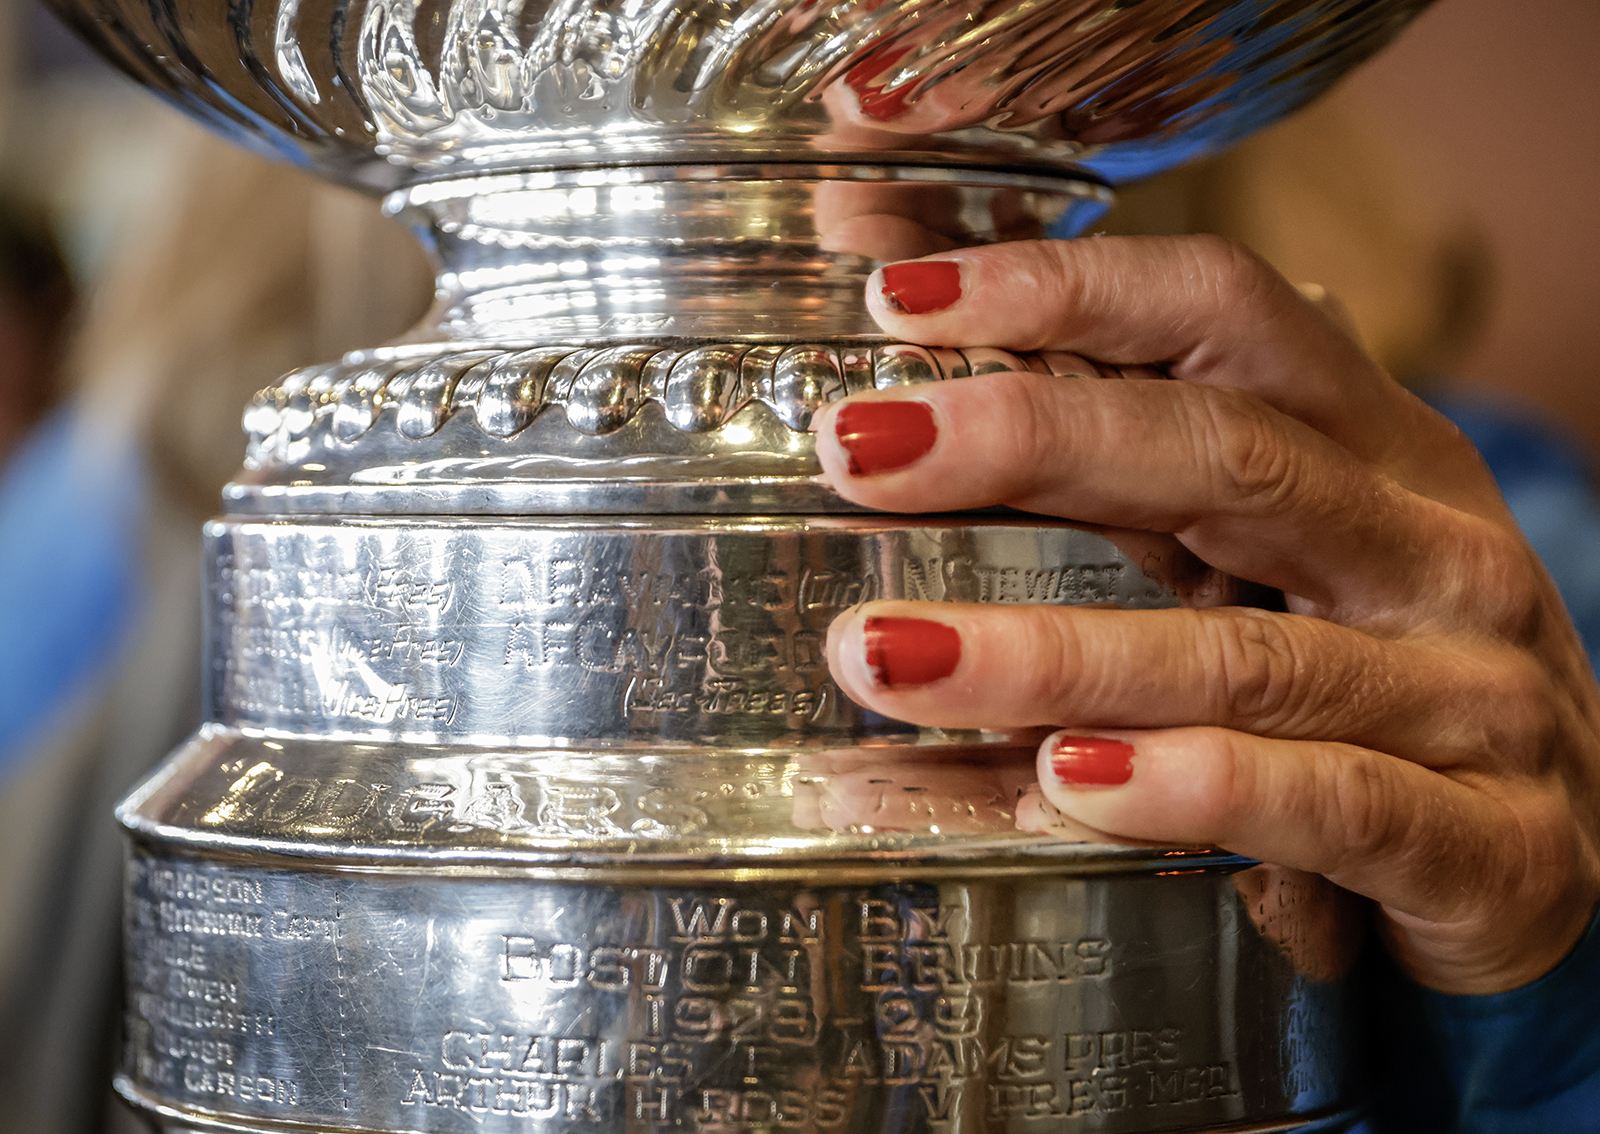 Hobey100 Events To Include Stanley Cup Visit; Tickets On Sale Now